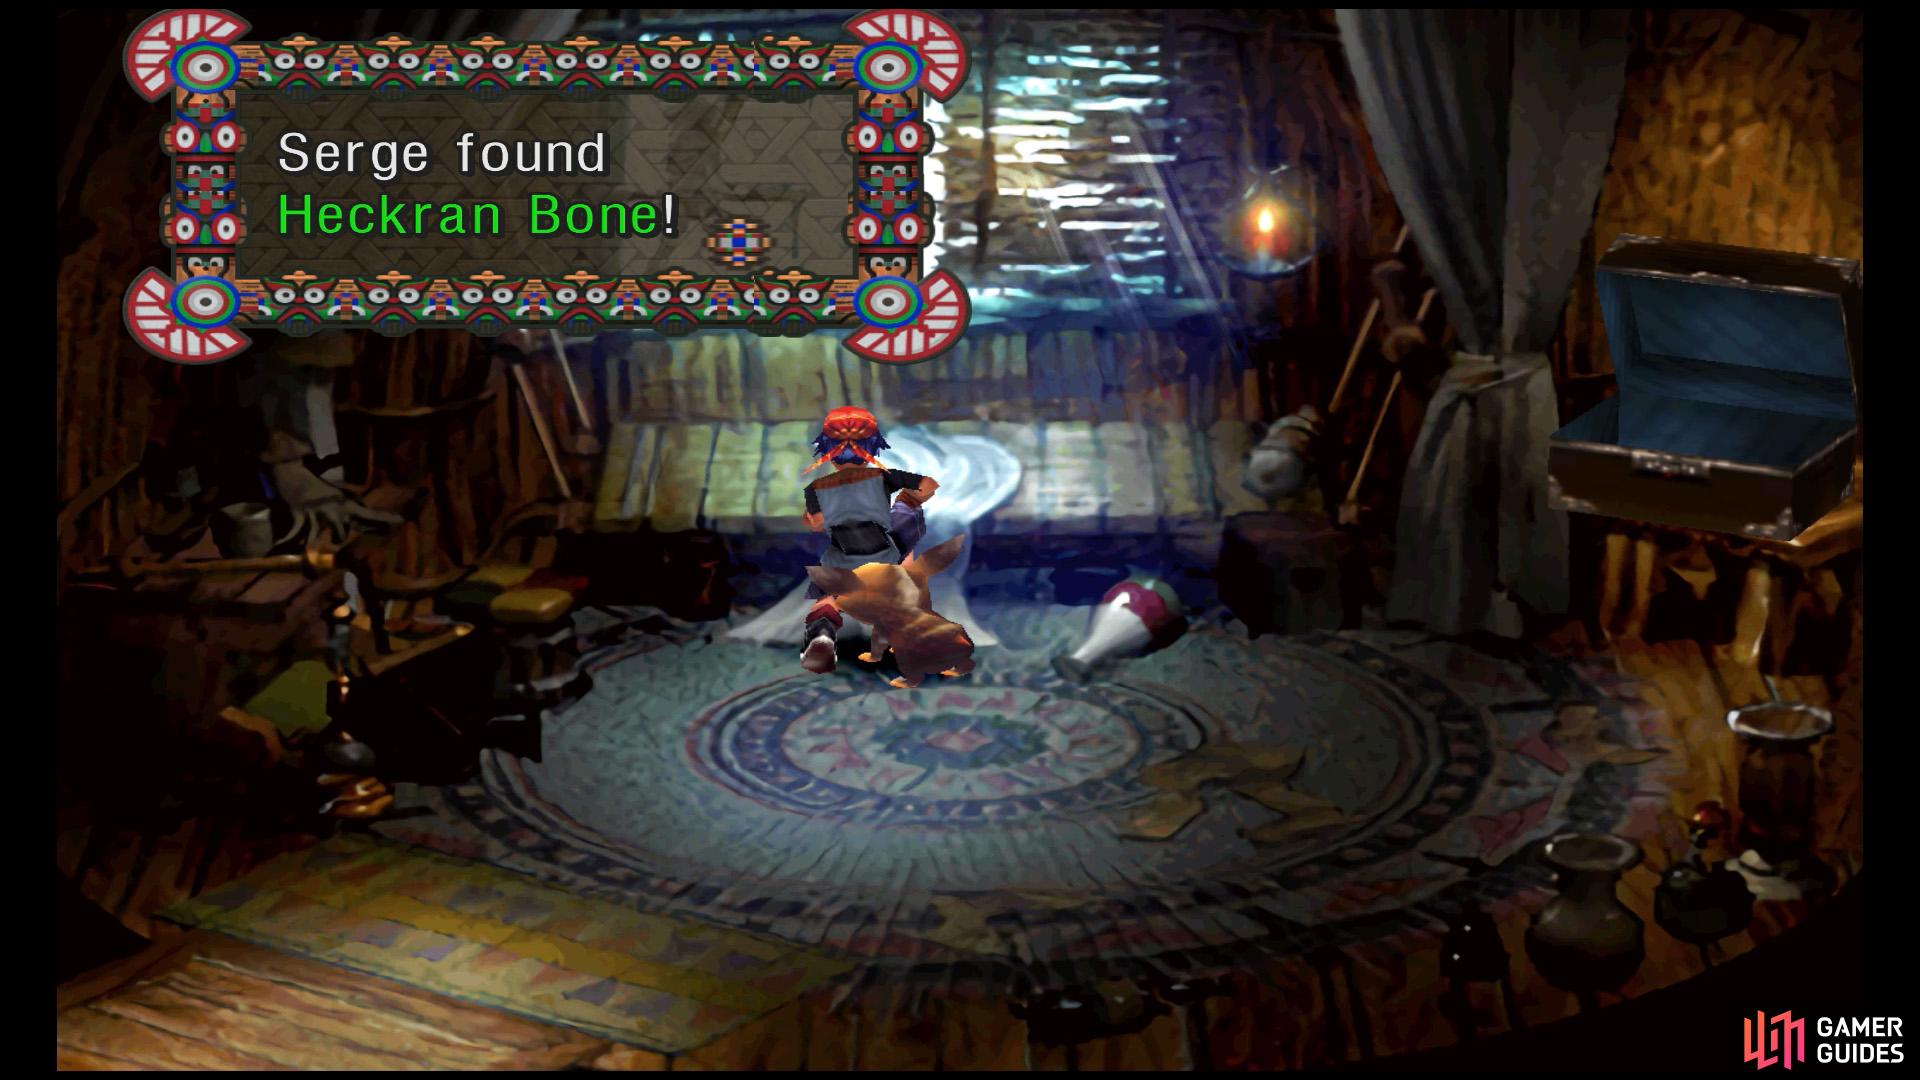 How to use the Chrono Cross to Recruit all Party Members - Tips